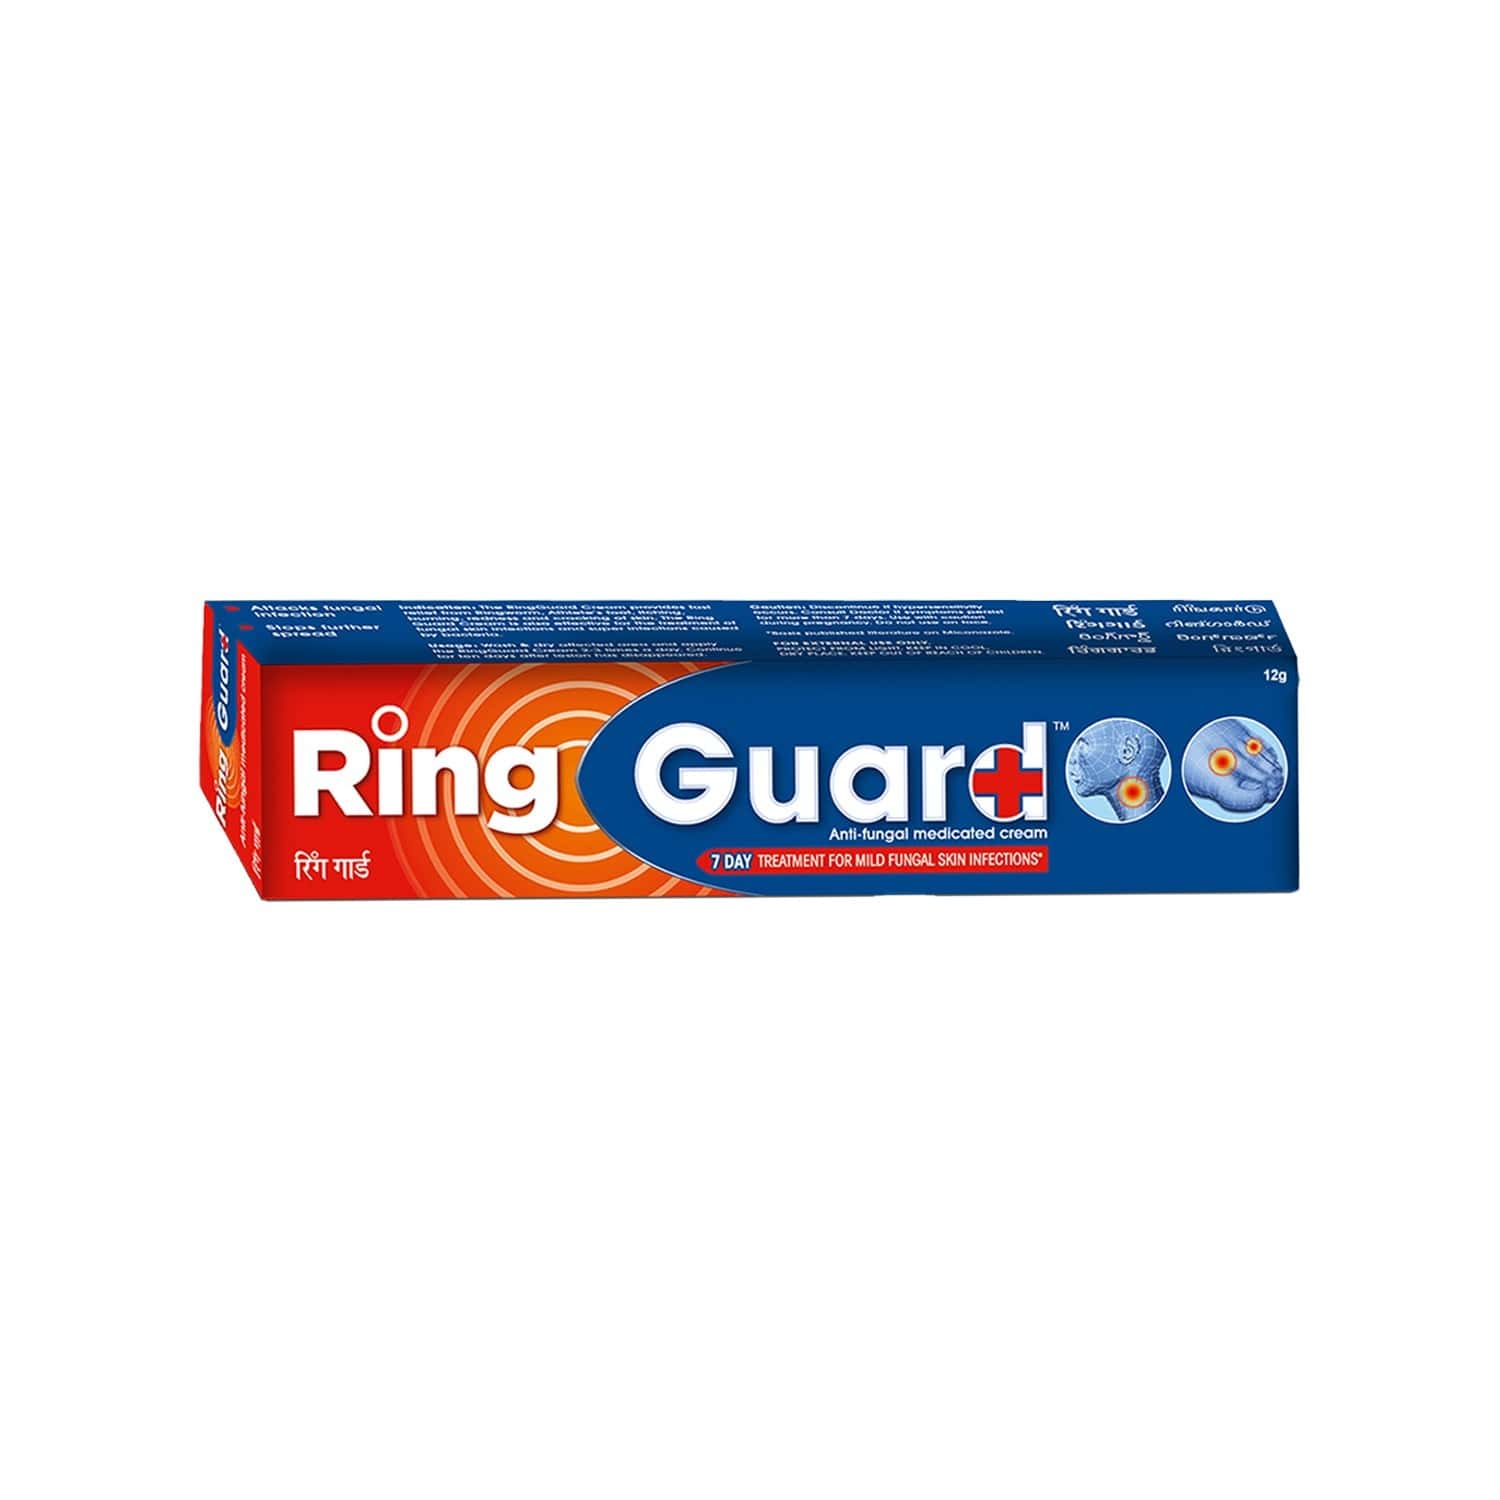 Ring Guard Plus Cream - Uses, Dosage, Side Effects, Price, Composition